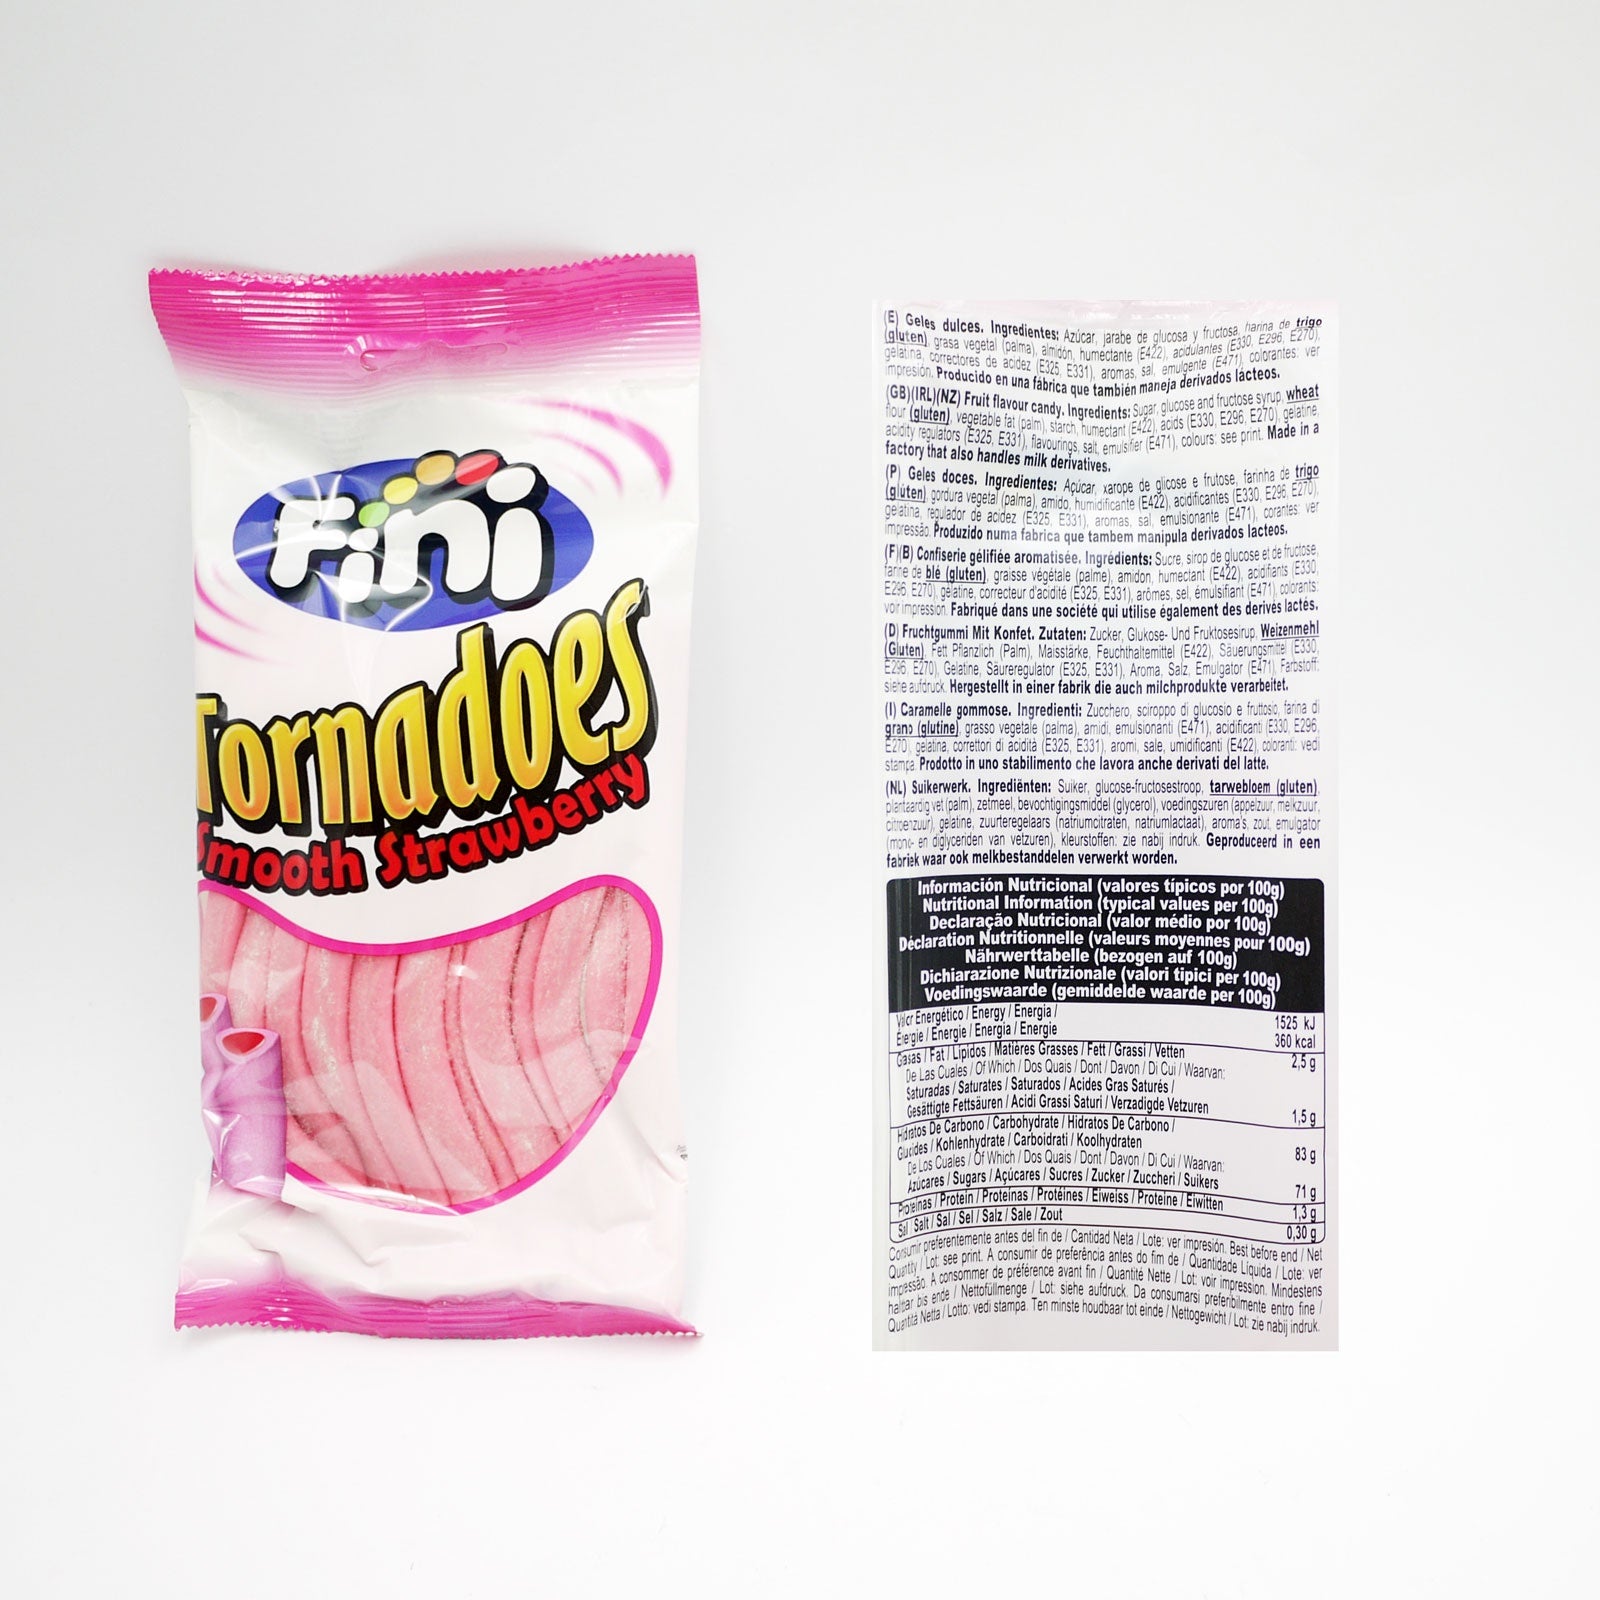 Fini Tornadoes Smooth Strawberry 180g *